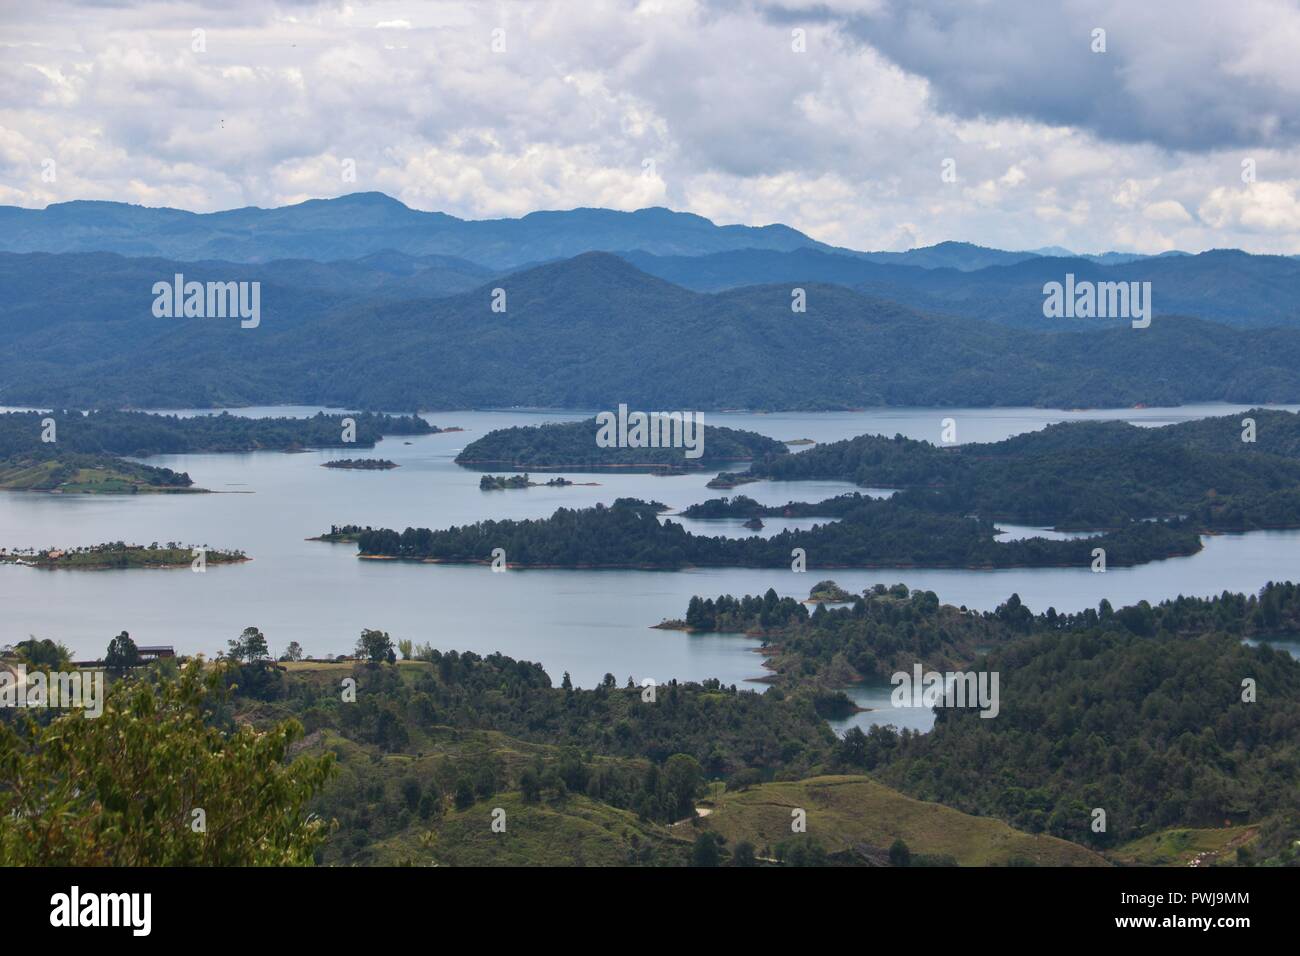 Stunning view including lakes, forests and clouds. Stock Photo